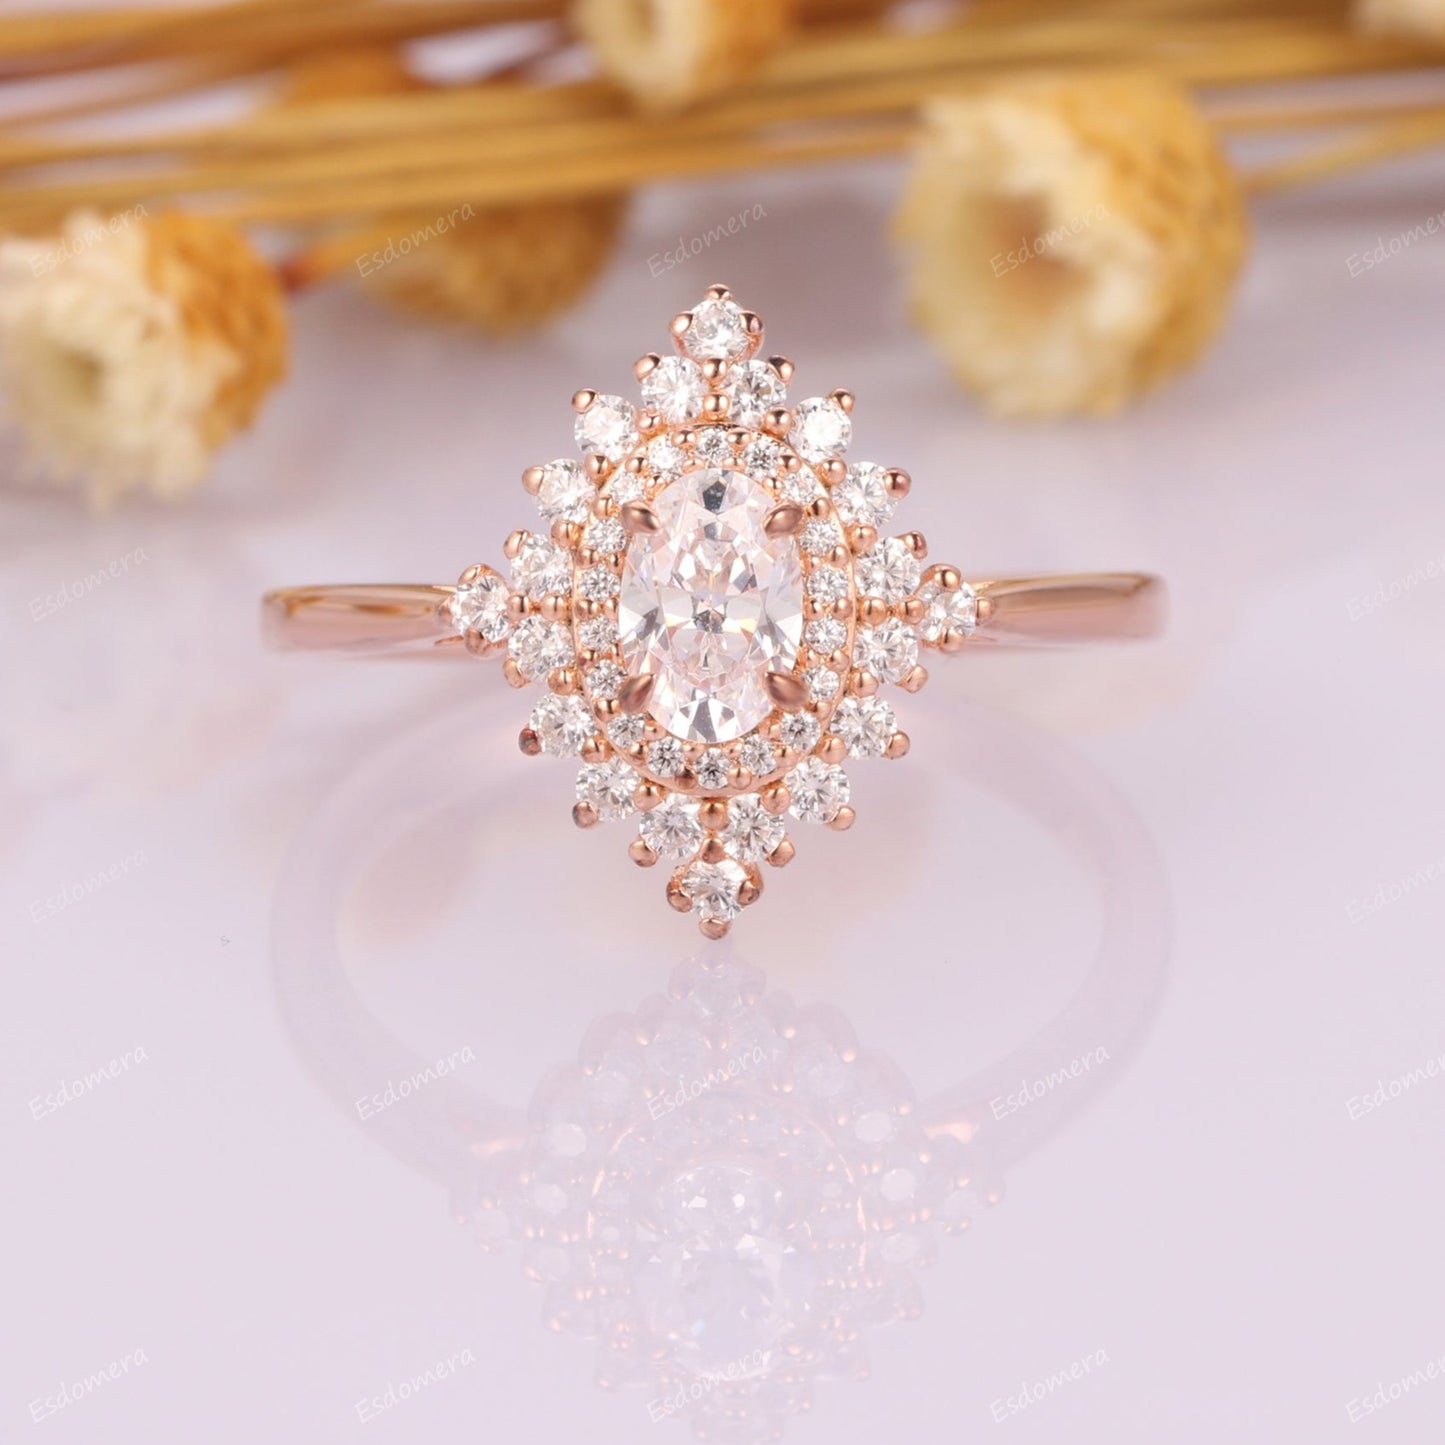 4x6mm Oval Cut Moissanite Engagement Ring For Her, Art Deco Moissanites Halo Wedding Ring, 14k Rose Gold Tapered Band Anniversary Ring For Women